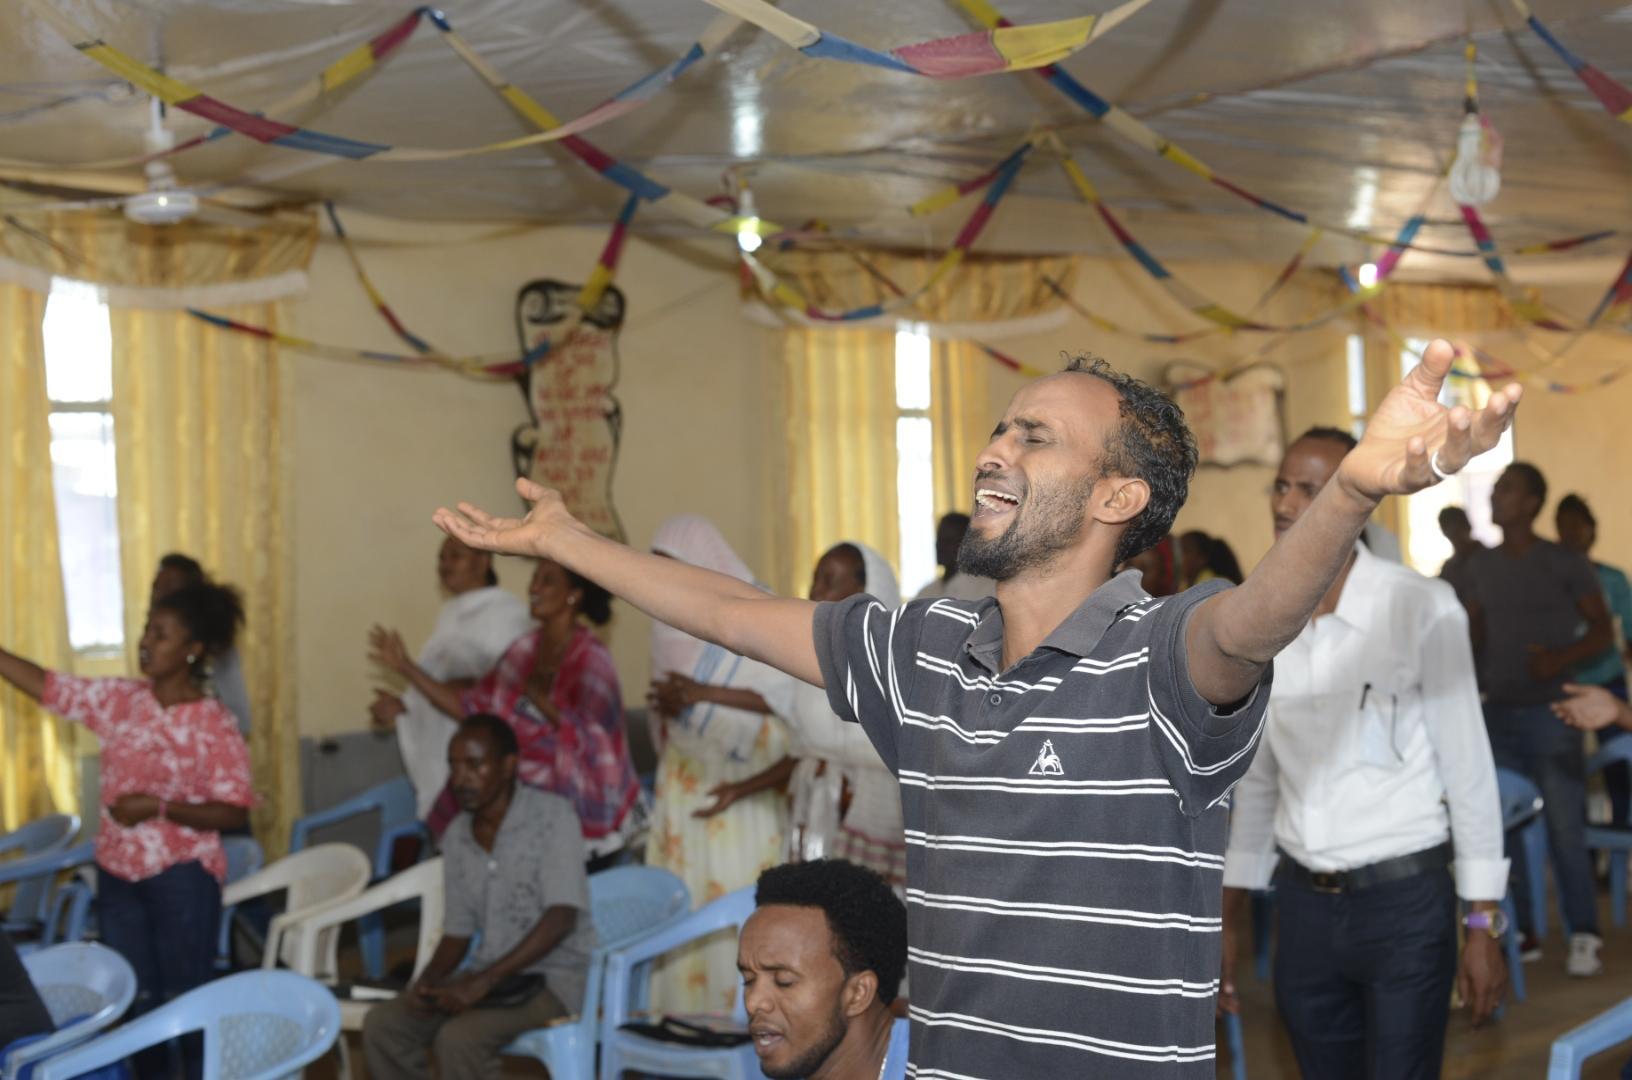 ERITREA | MAY. 25, 2022 — Christians Arrested During Church Service